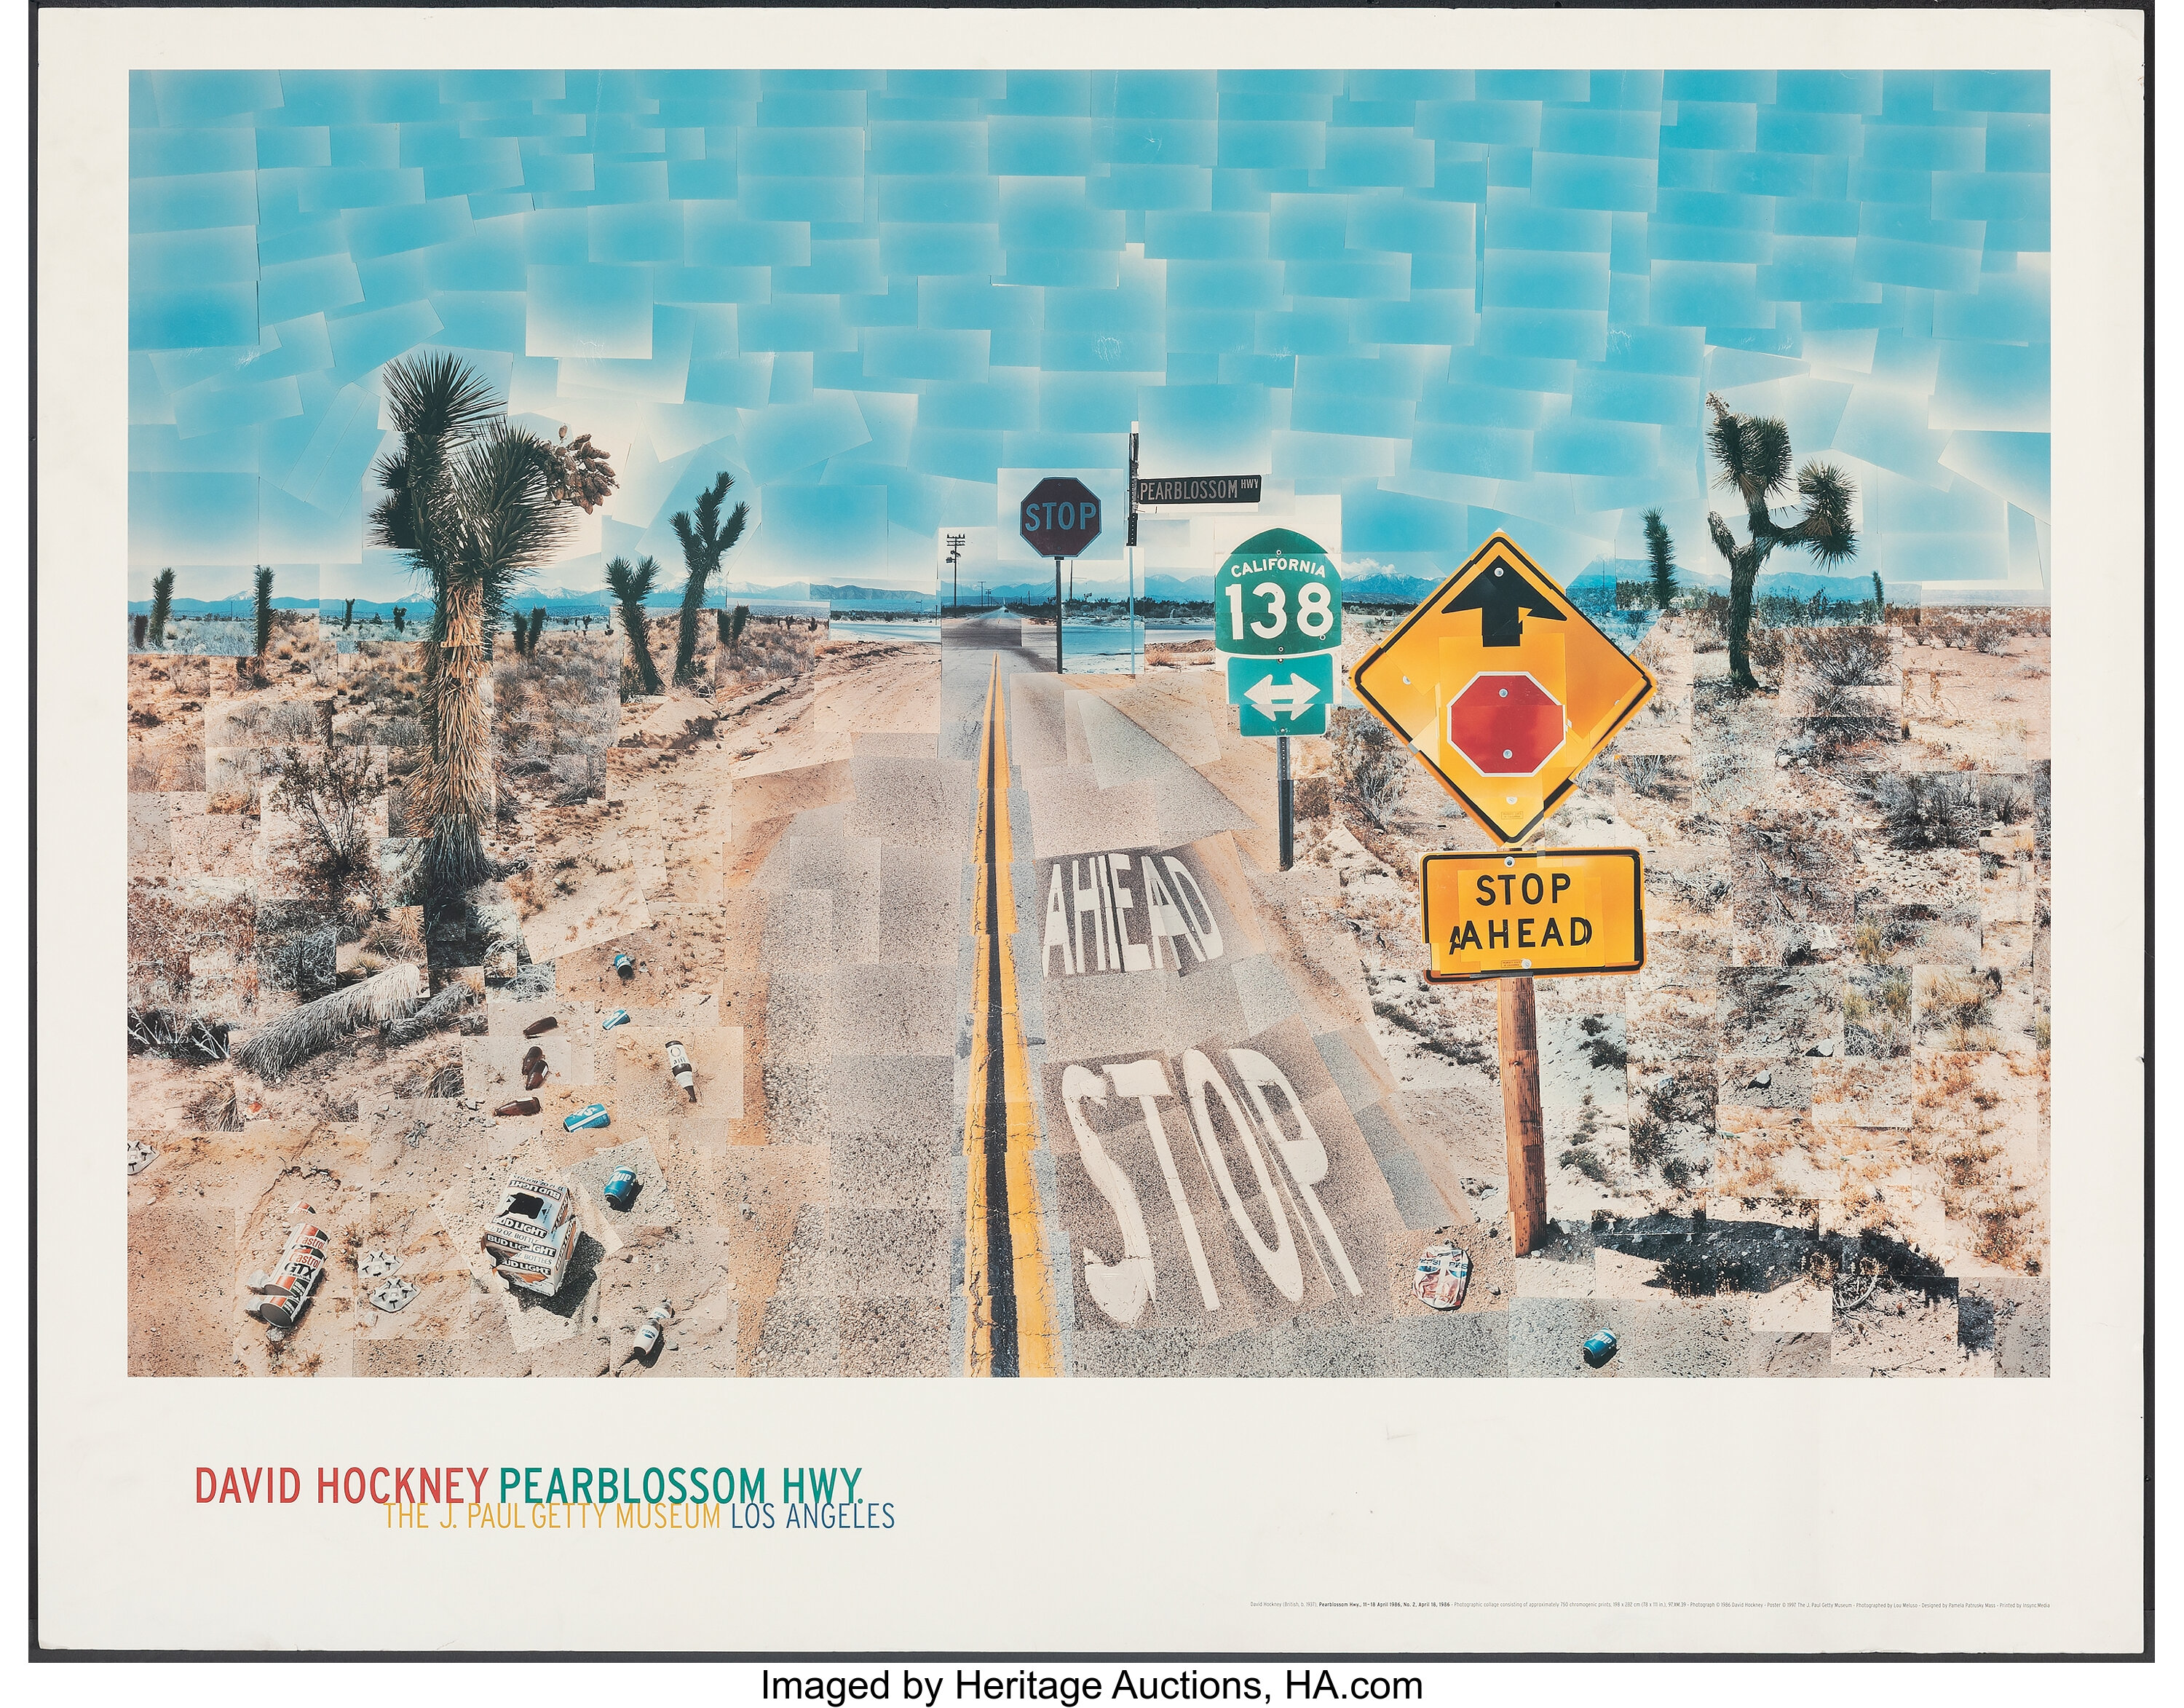 Pearblossom Highway by David Hockney (J. Paul Getty 1997). | Lot #54253 | Heritage Auctions